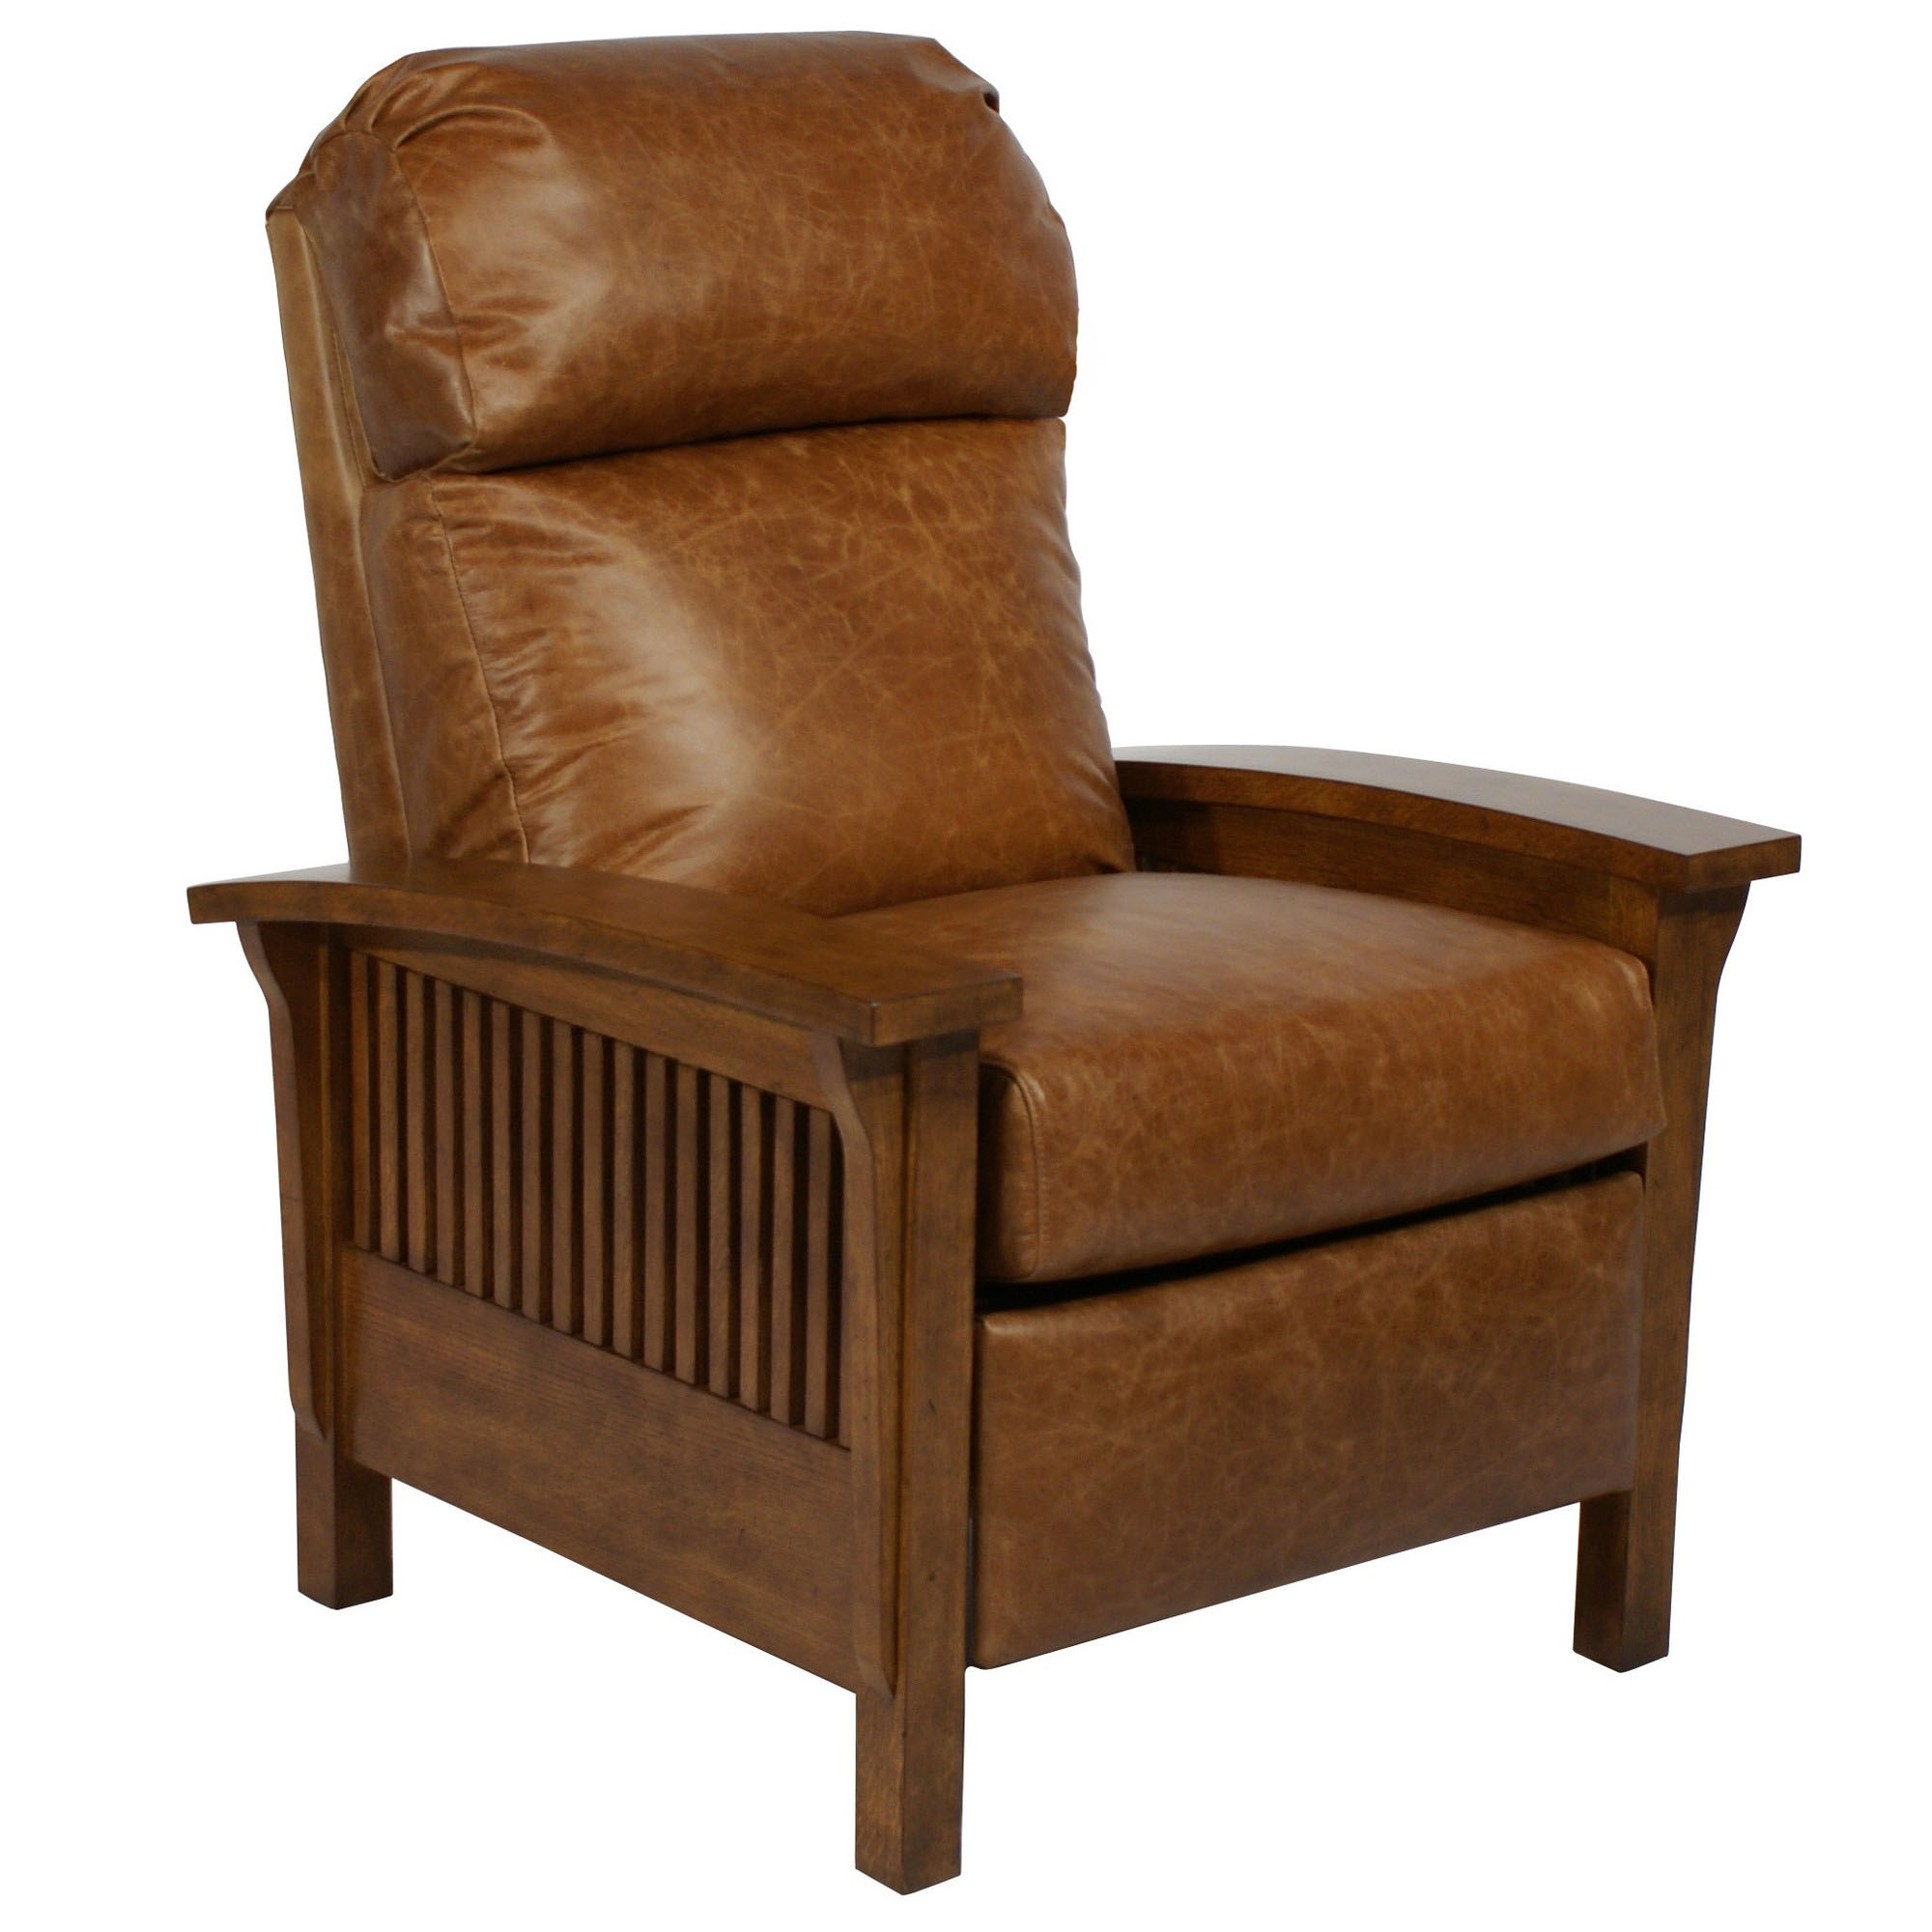 Barcalounger Mission (Craftsman II) Recliner Chair - Leather Recliner